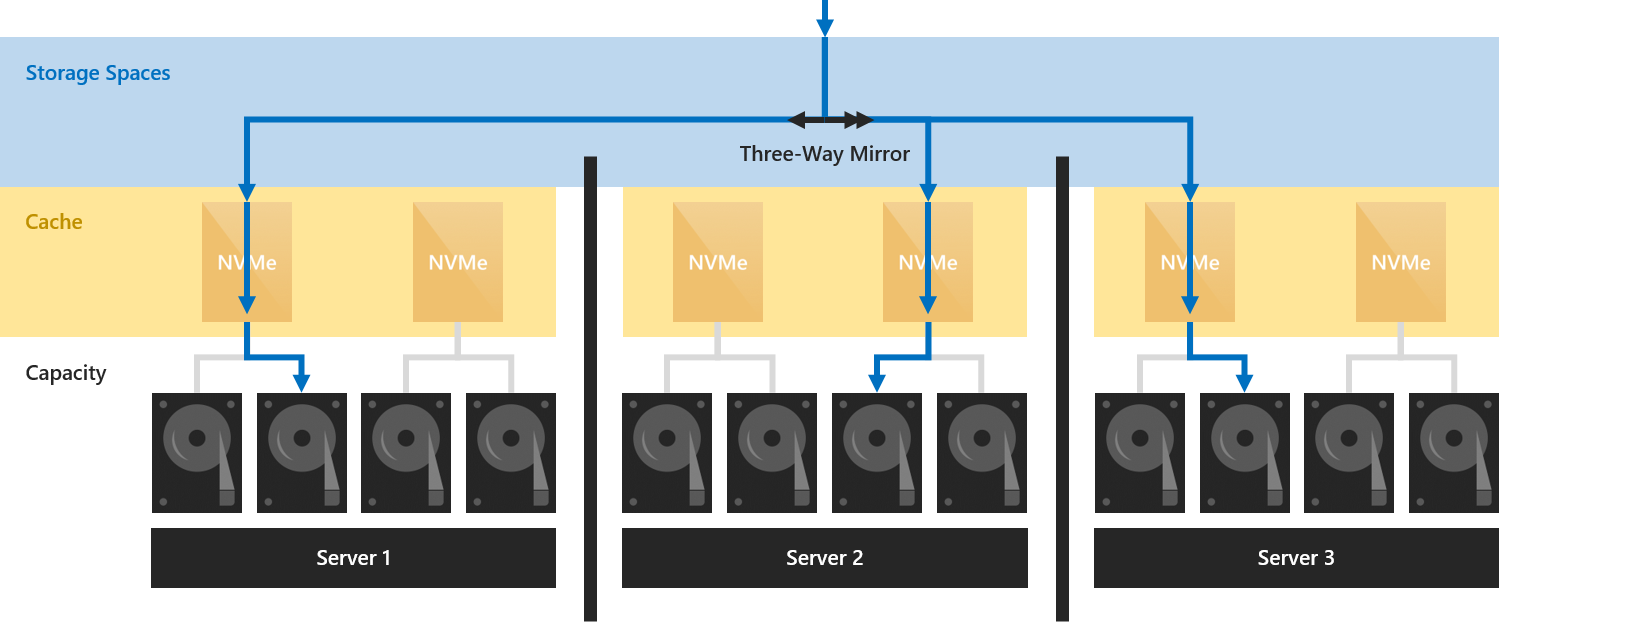 Diagram represents three servers joined by a three-way mirror in a Storage Space layer, which accesses a cache layer of NVMe drives which access unlabeled capacity drives.